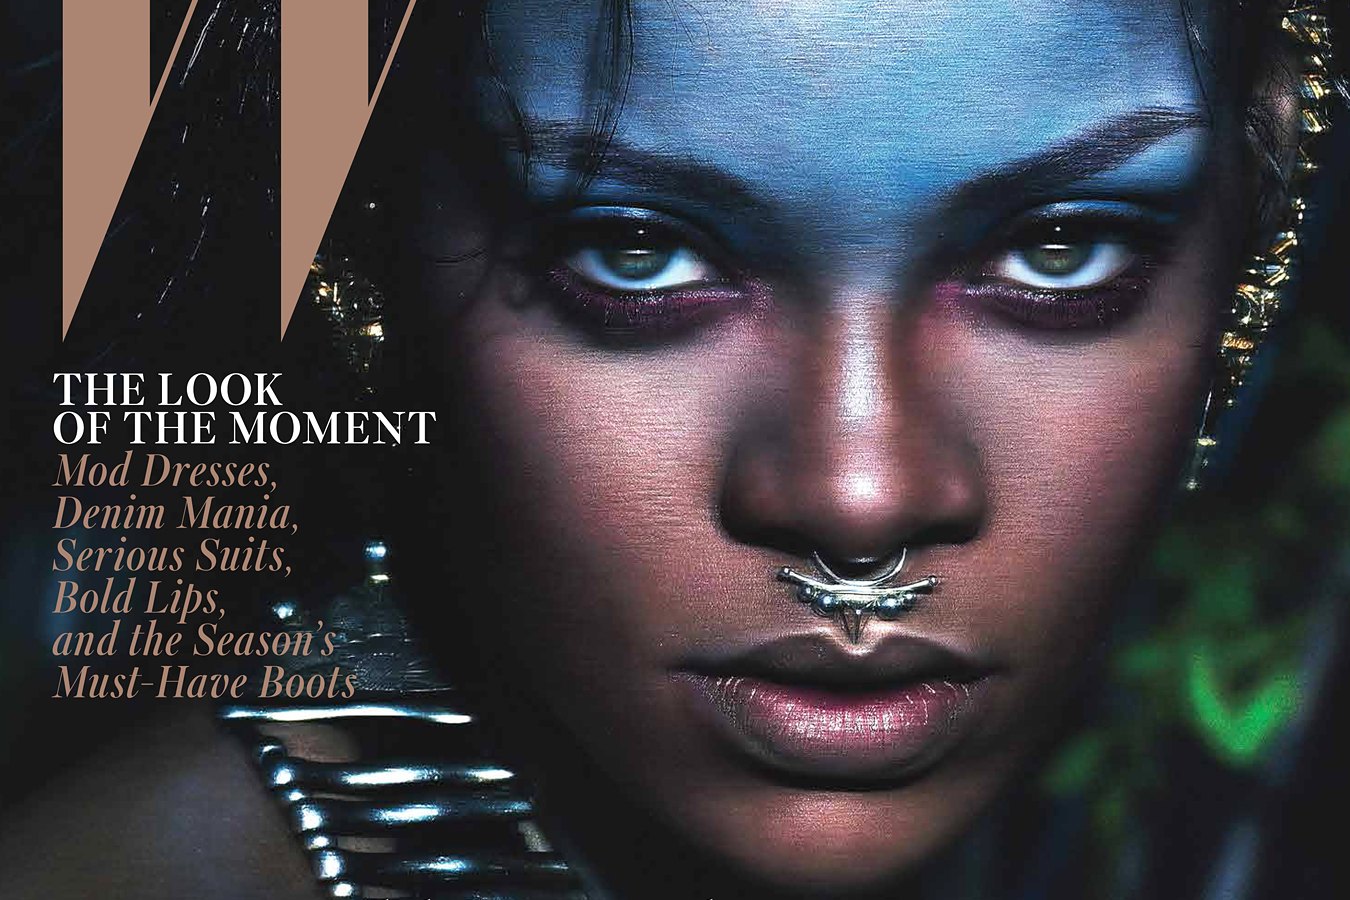 Rihanna on the cover of W Magazine